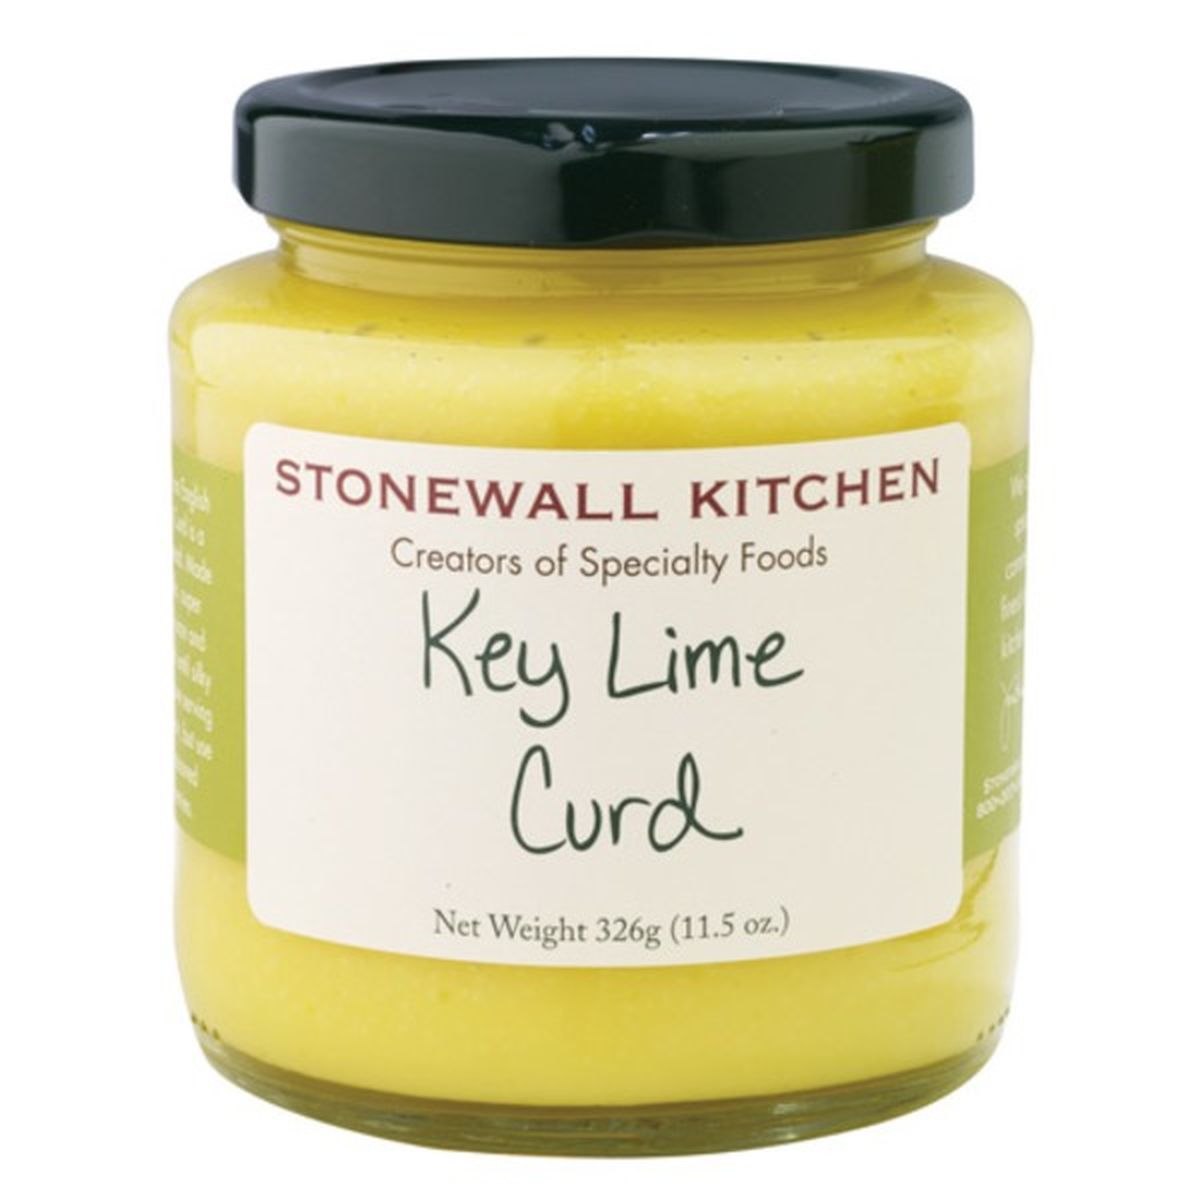 Calories in Stonewall Kitchen Key Lime Curd